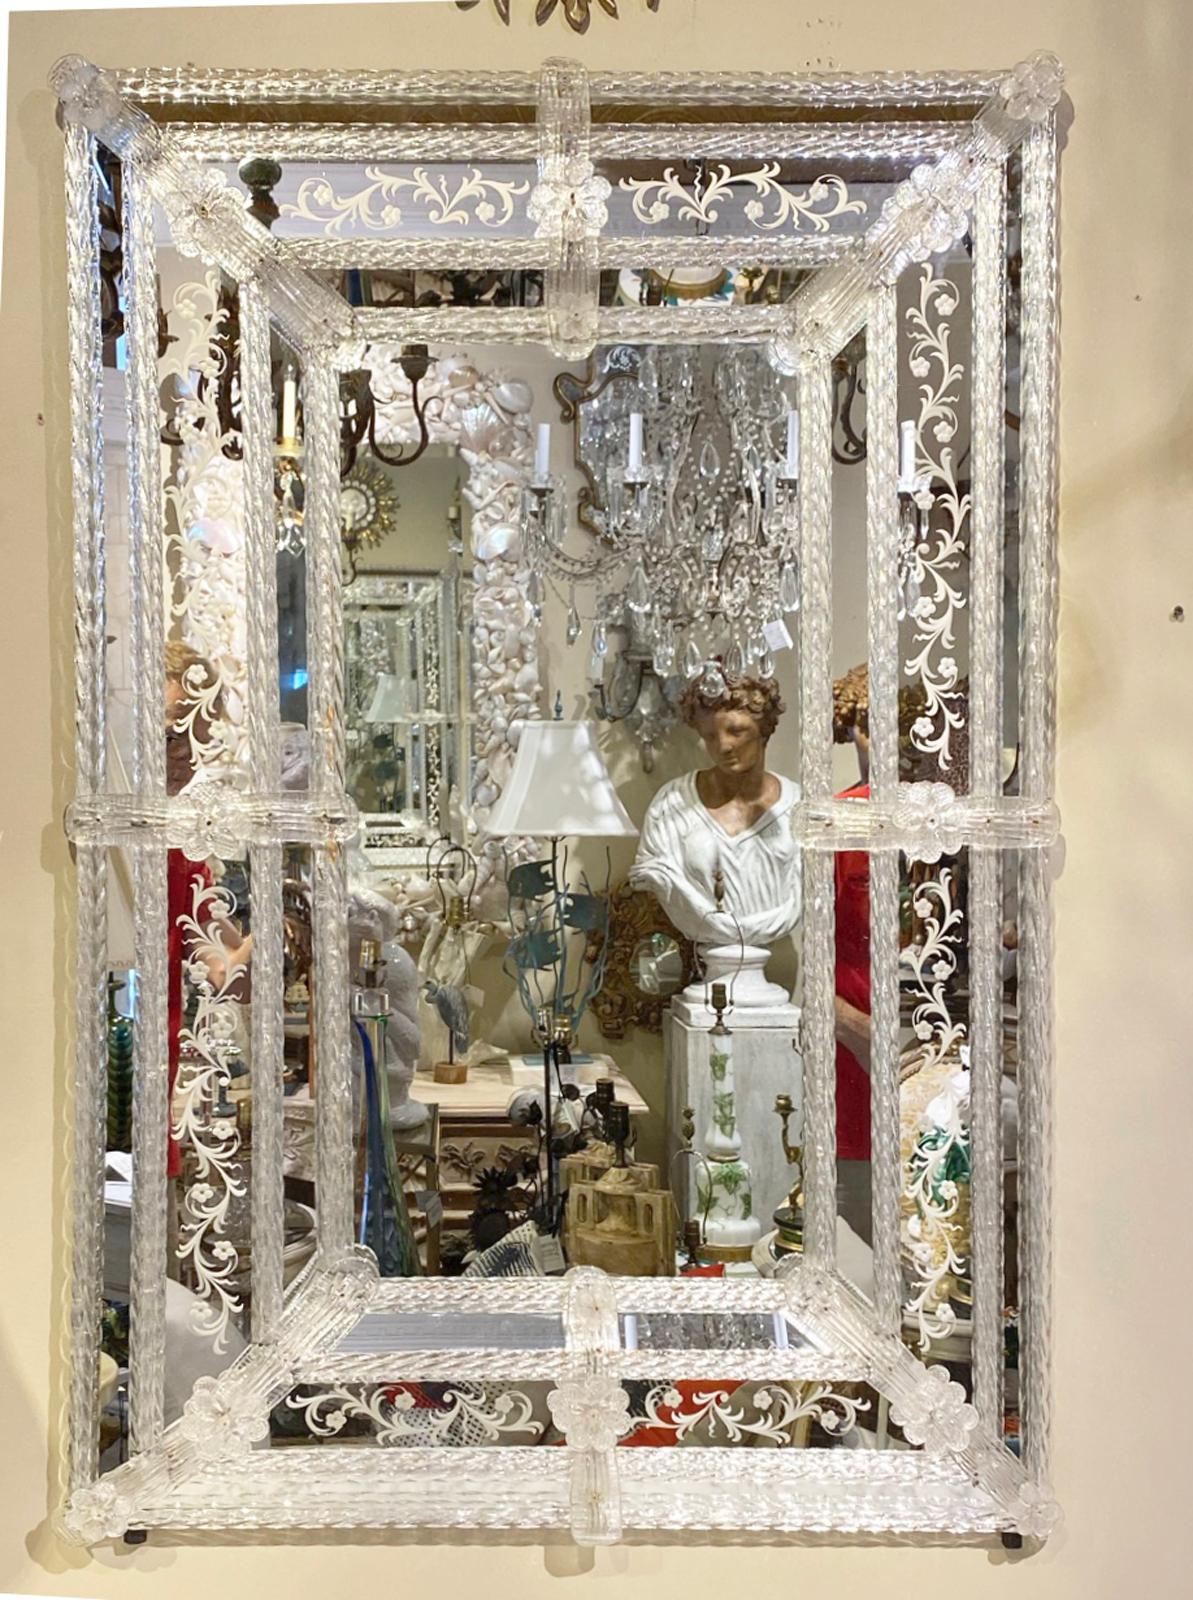 Classic Venetian glass wall mirror, having a central perimeter of clear mirrorplate, in a frame of mirror reliefs, etched with scrollwork; handblown accents of ribbons, ropes, and flowerheads adorn its corners and sides. 

Stock ID: D3078.